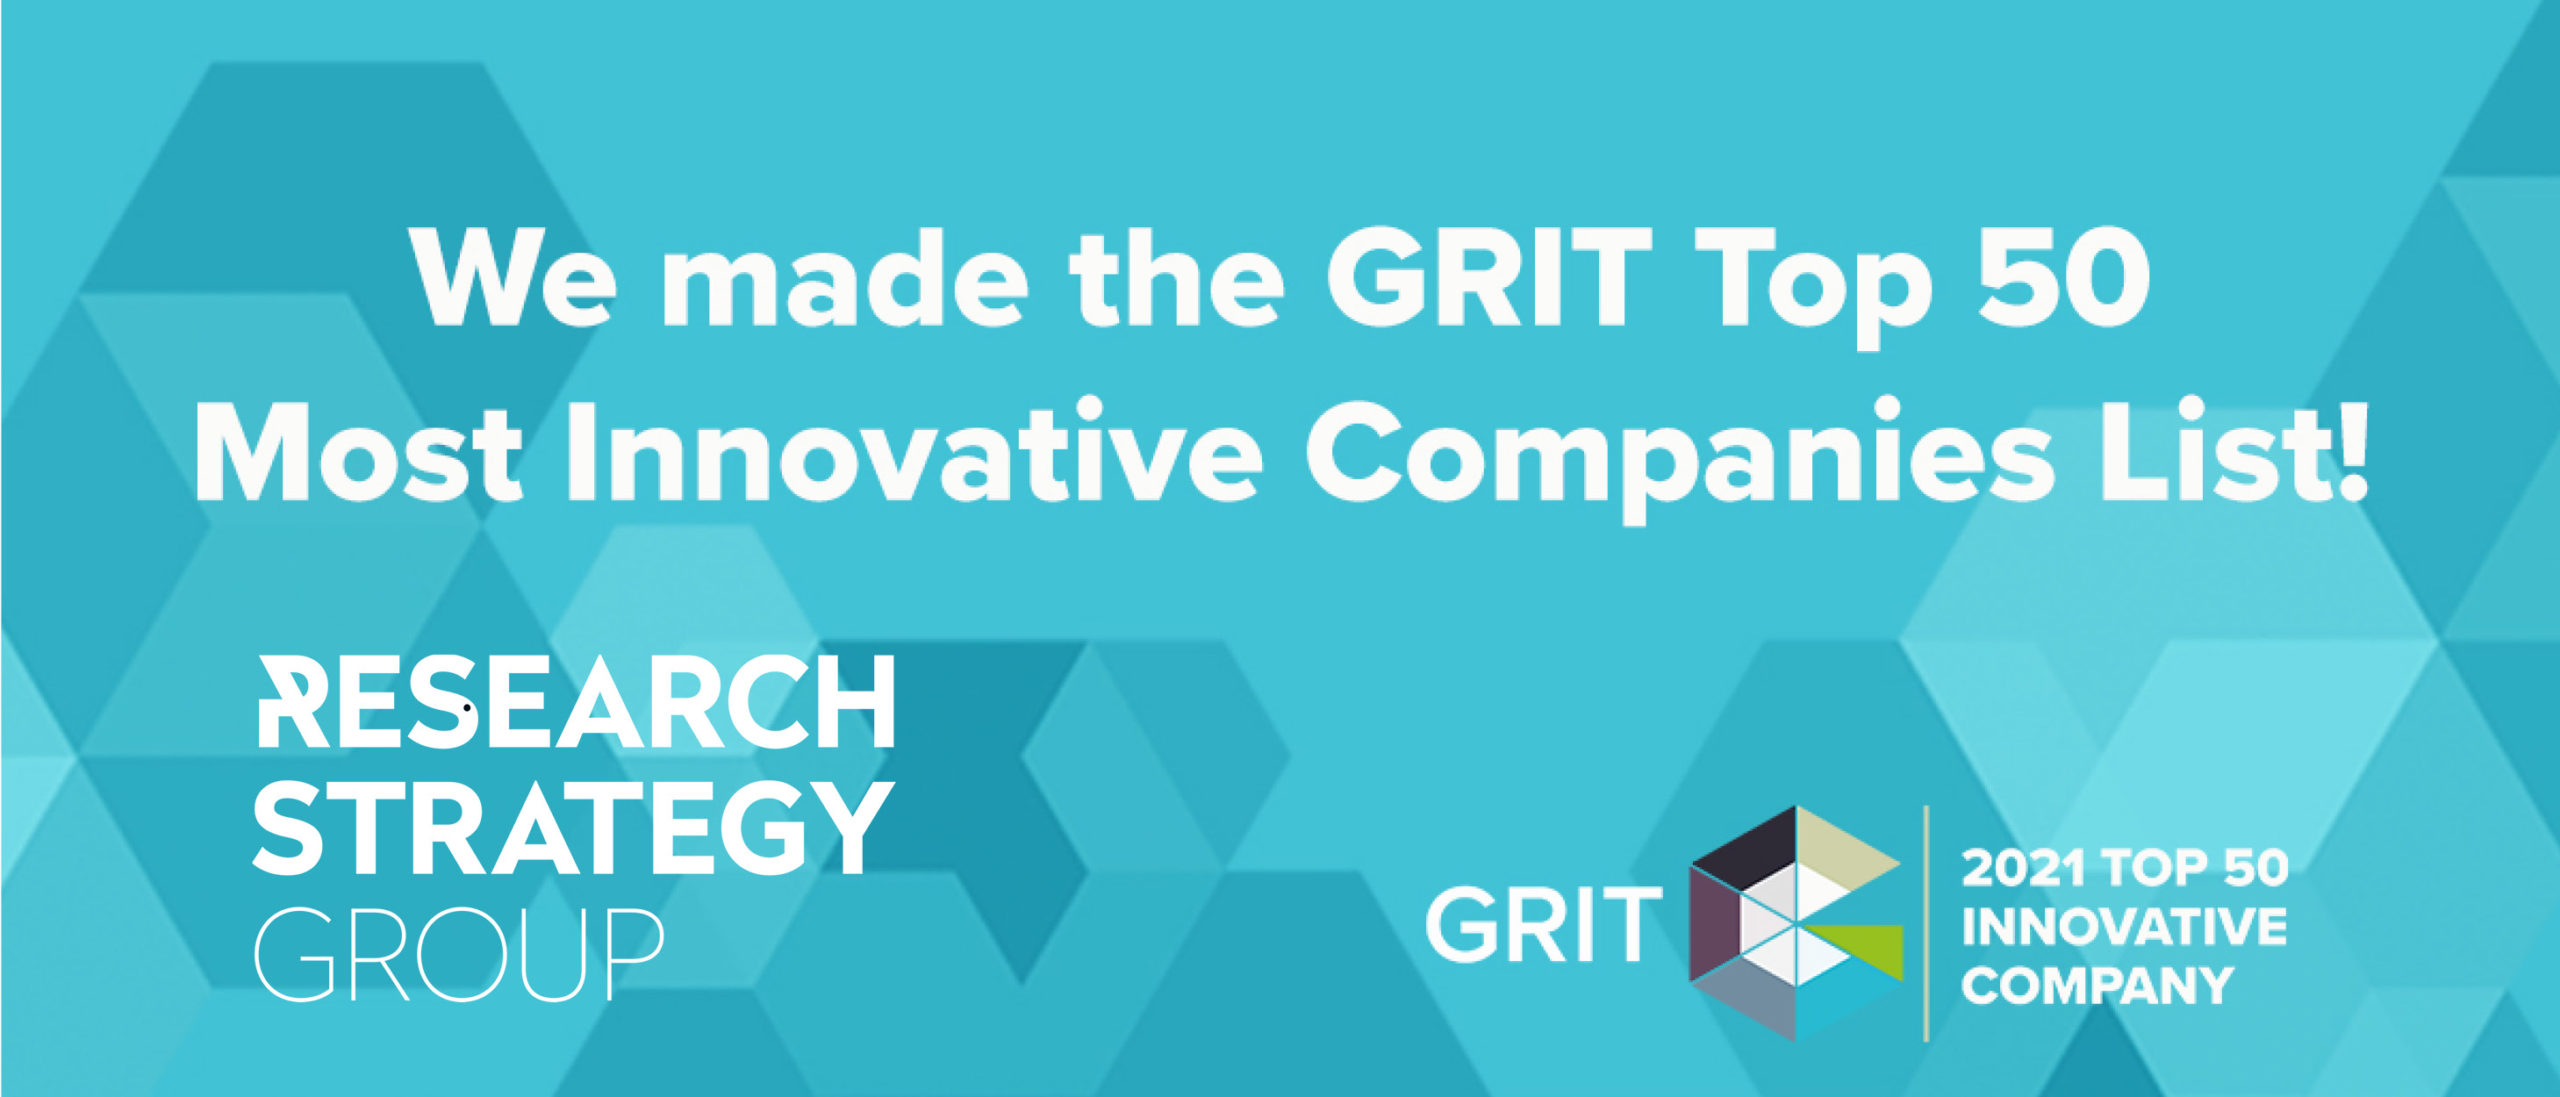 GRIT logo with test "We made the GRIT Top 50 Most Innovative Companies List!"